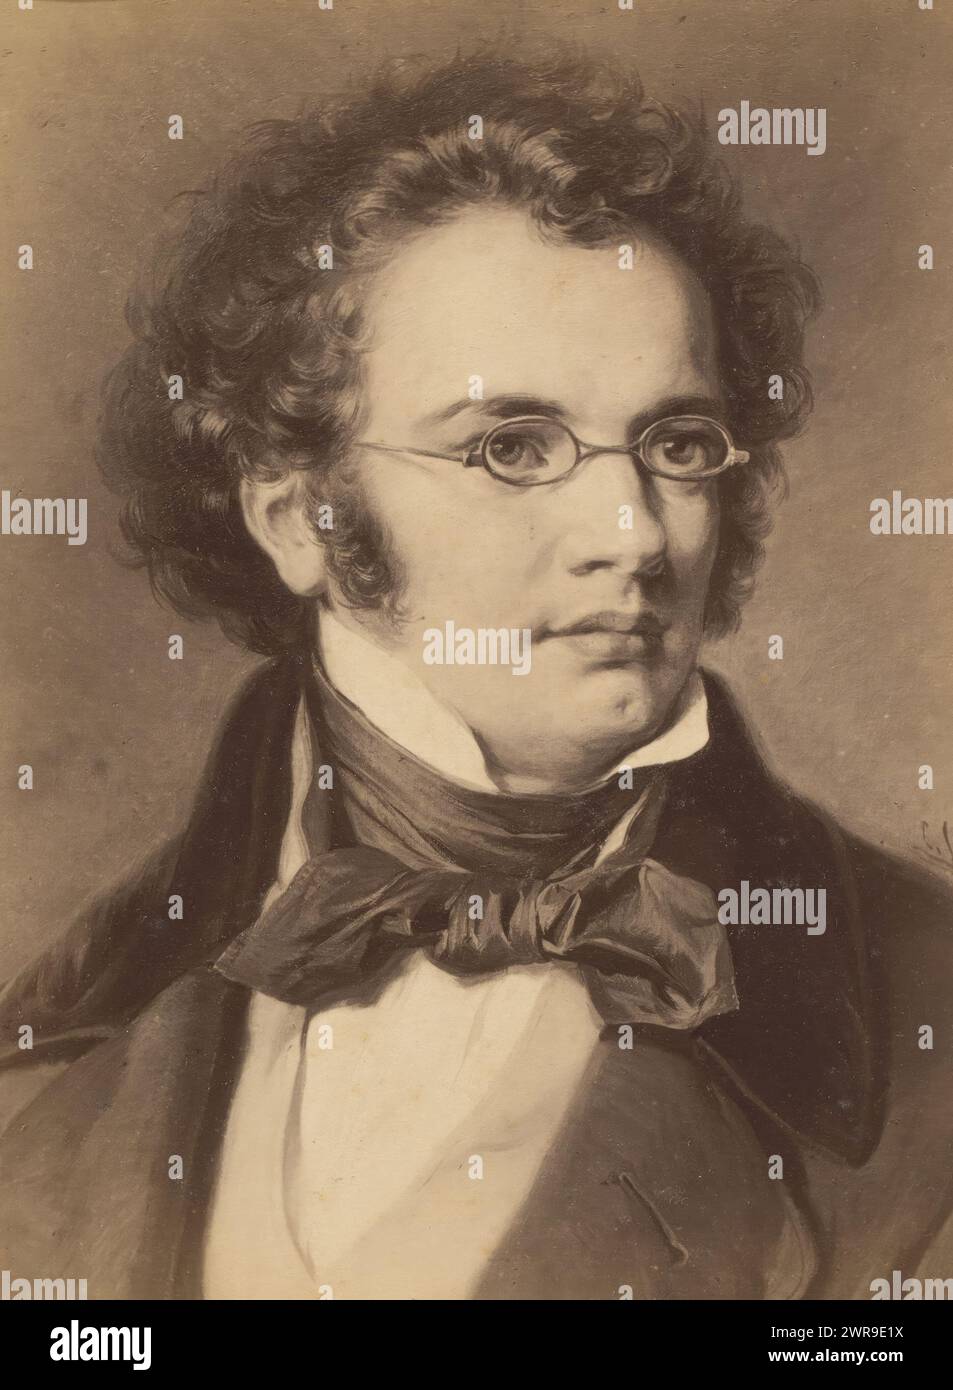 Photo reproduction of a painted portrait of Franz Schubert by Carl Jaeger, This photo is part of an album., Friedrich Bruckmann, after painting by: Carl Jaeger, 1870 - 1890, cardboard, albumen print, height 134 mm × width 96 mm, photograph Stock Photo